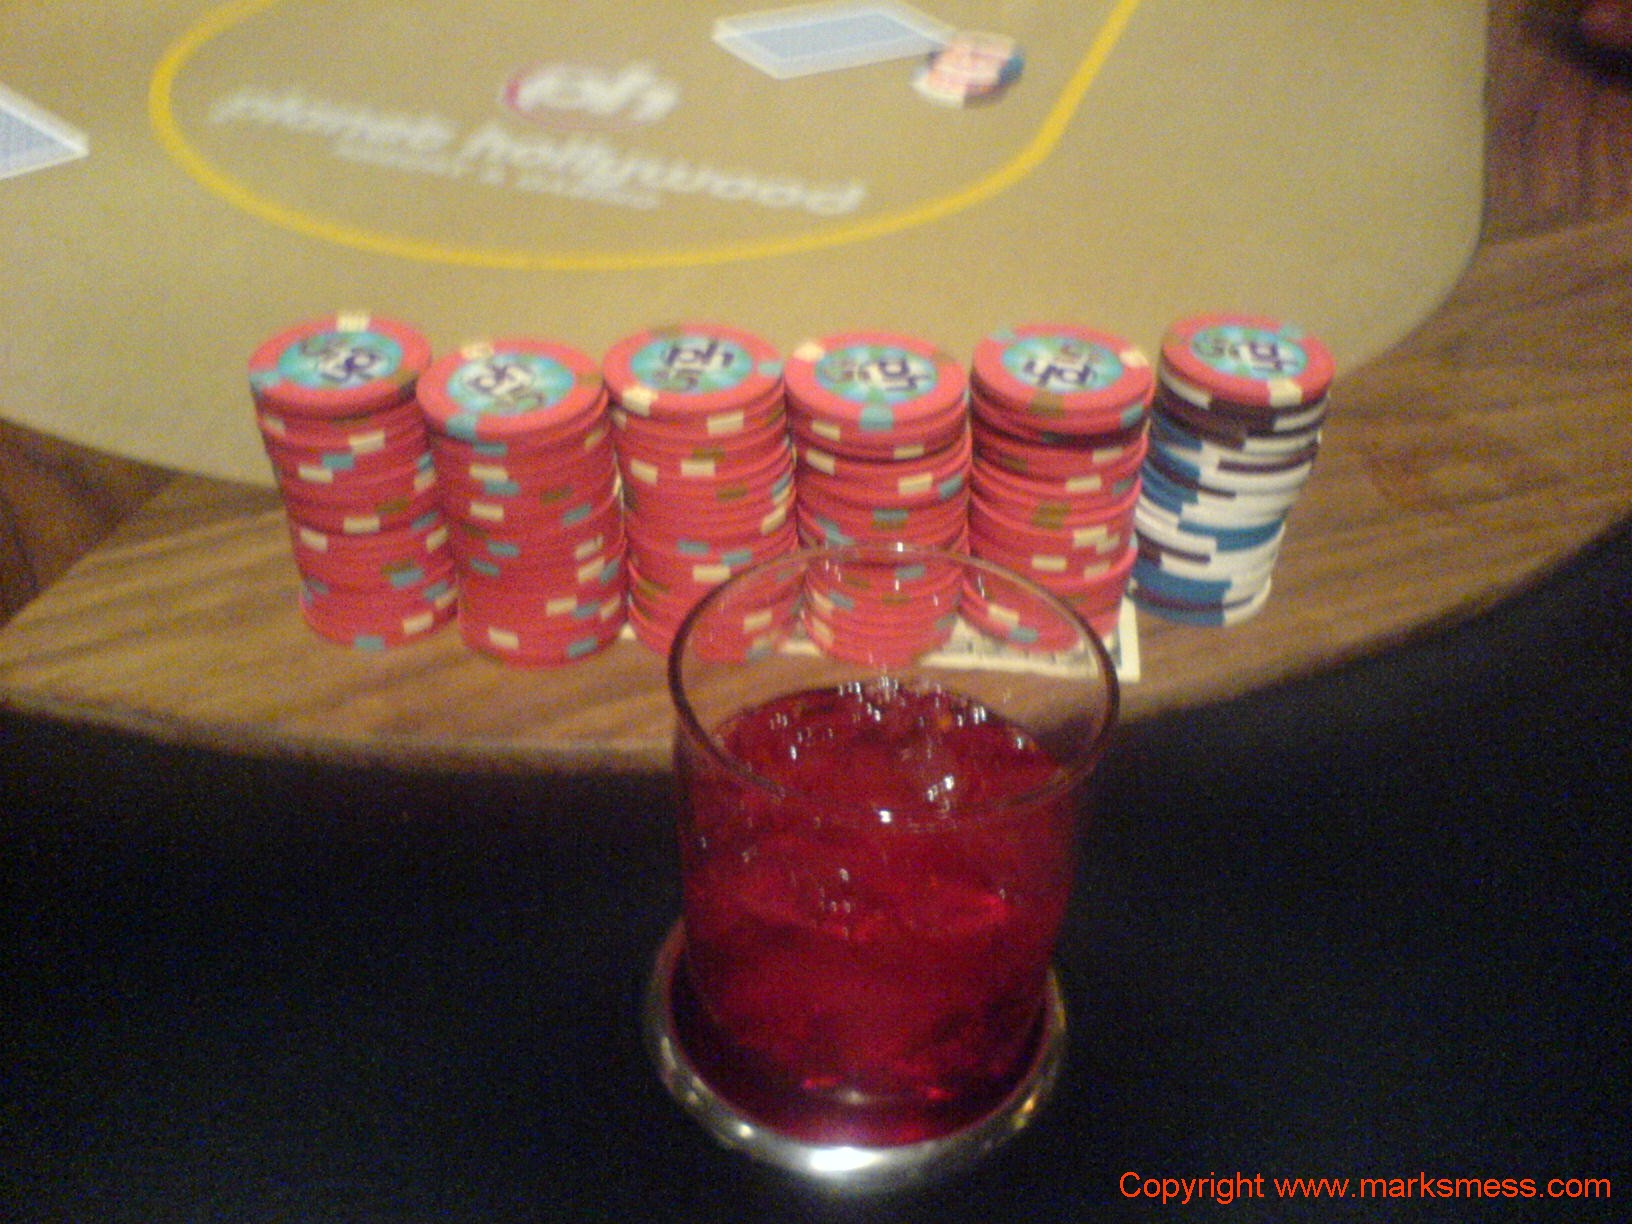 Planet_hollywood_poker Chips